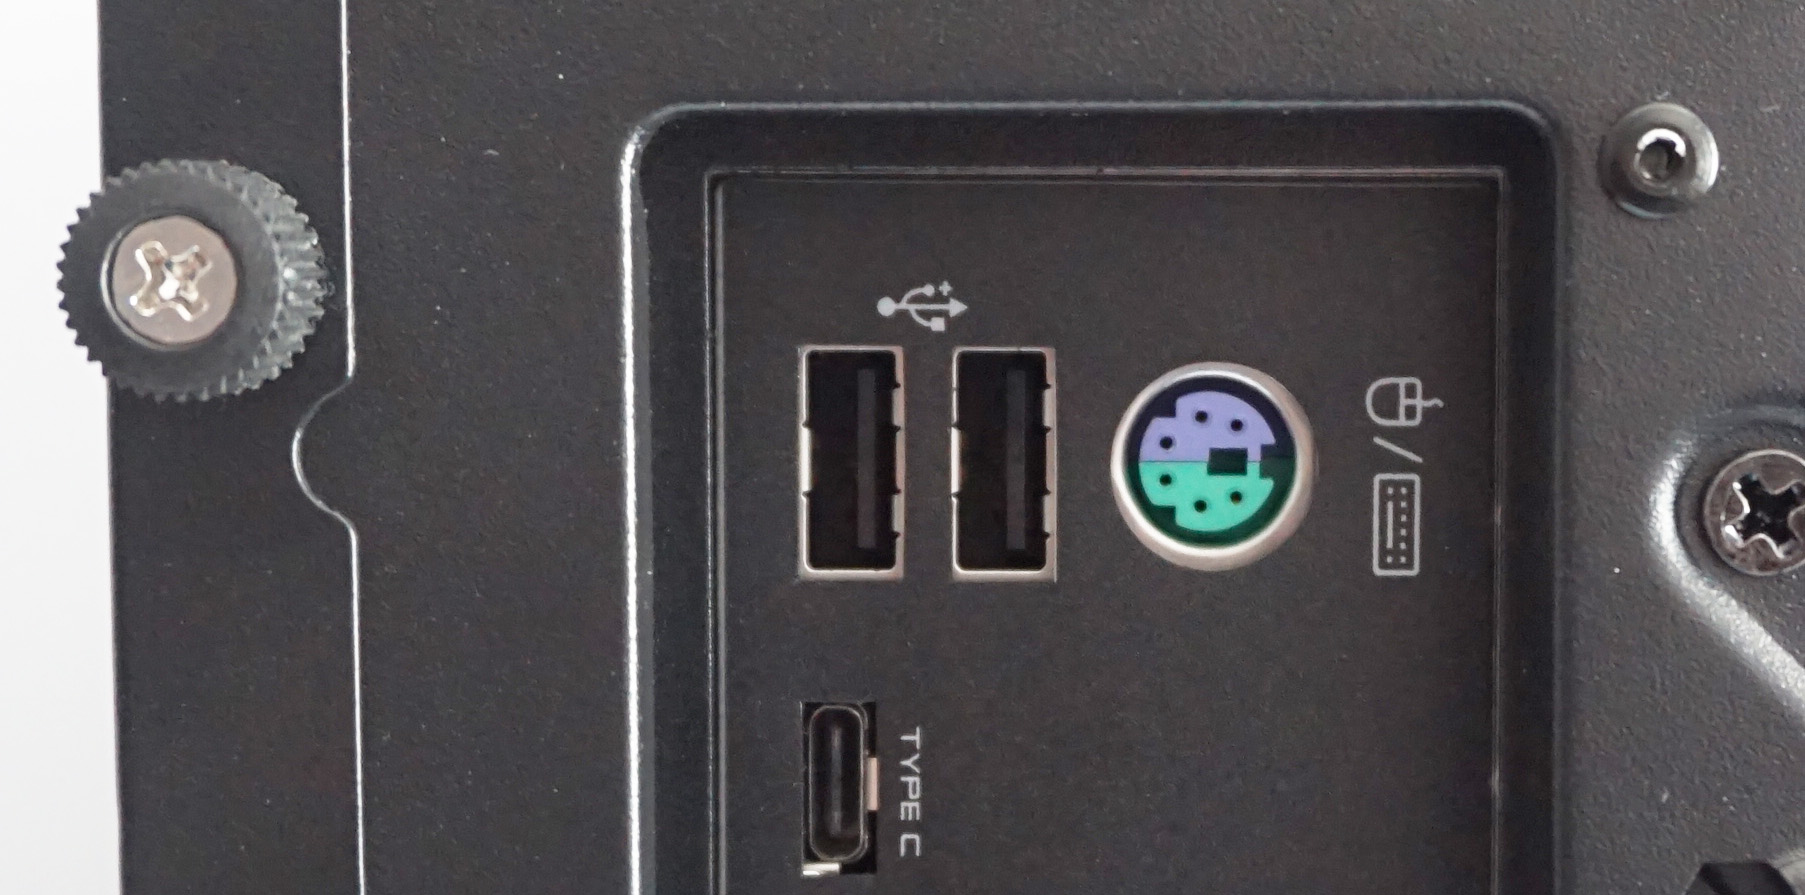 Check if the mouse and keyboard are properly connected to the computer.
Ensure the USB cables are securely plugged into the appropriate ports.